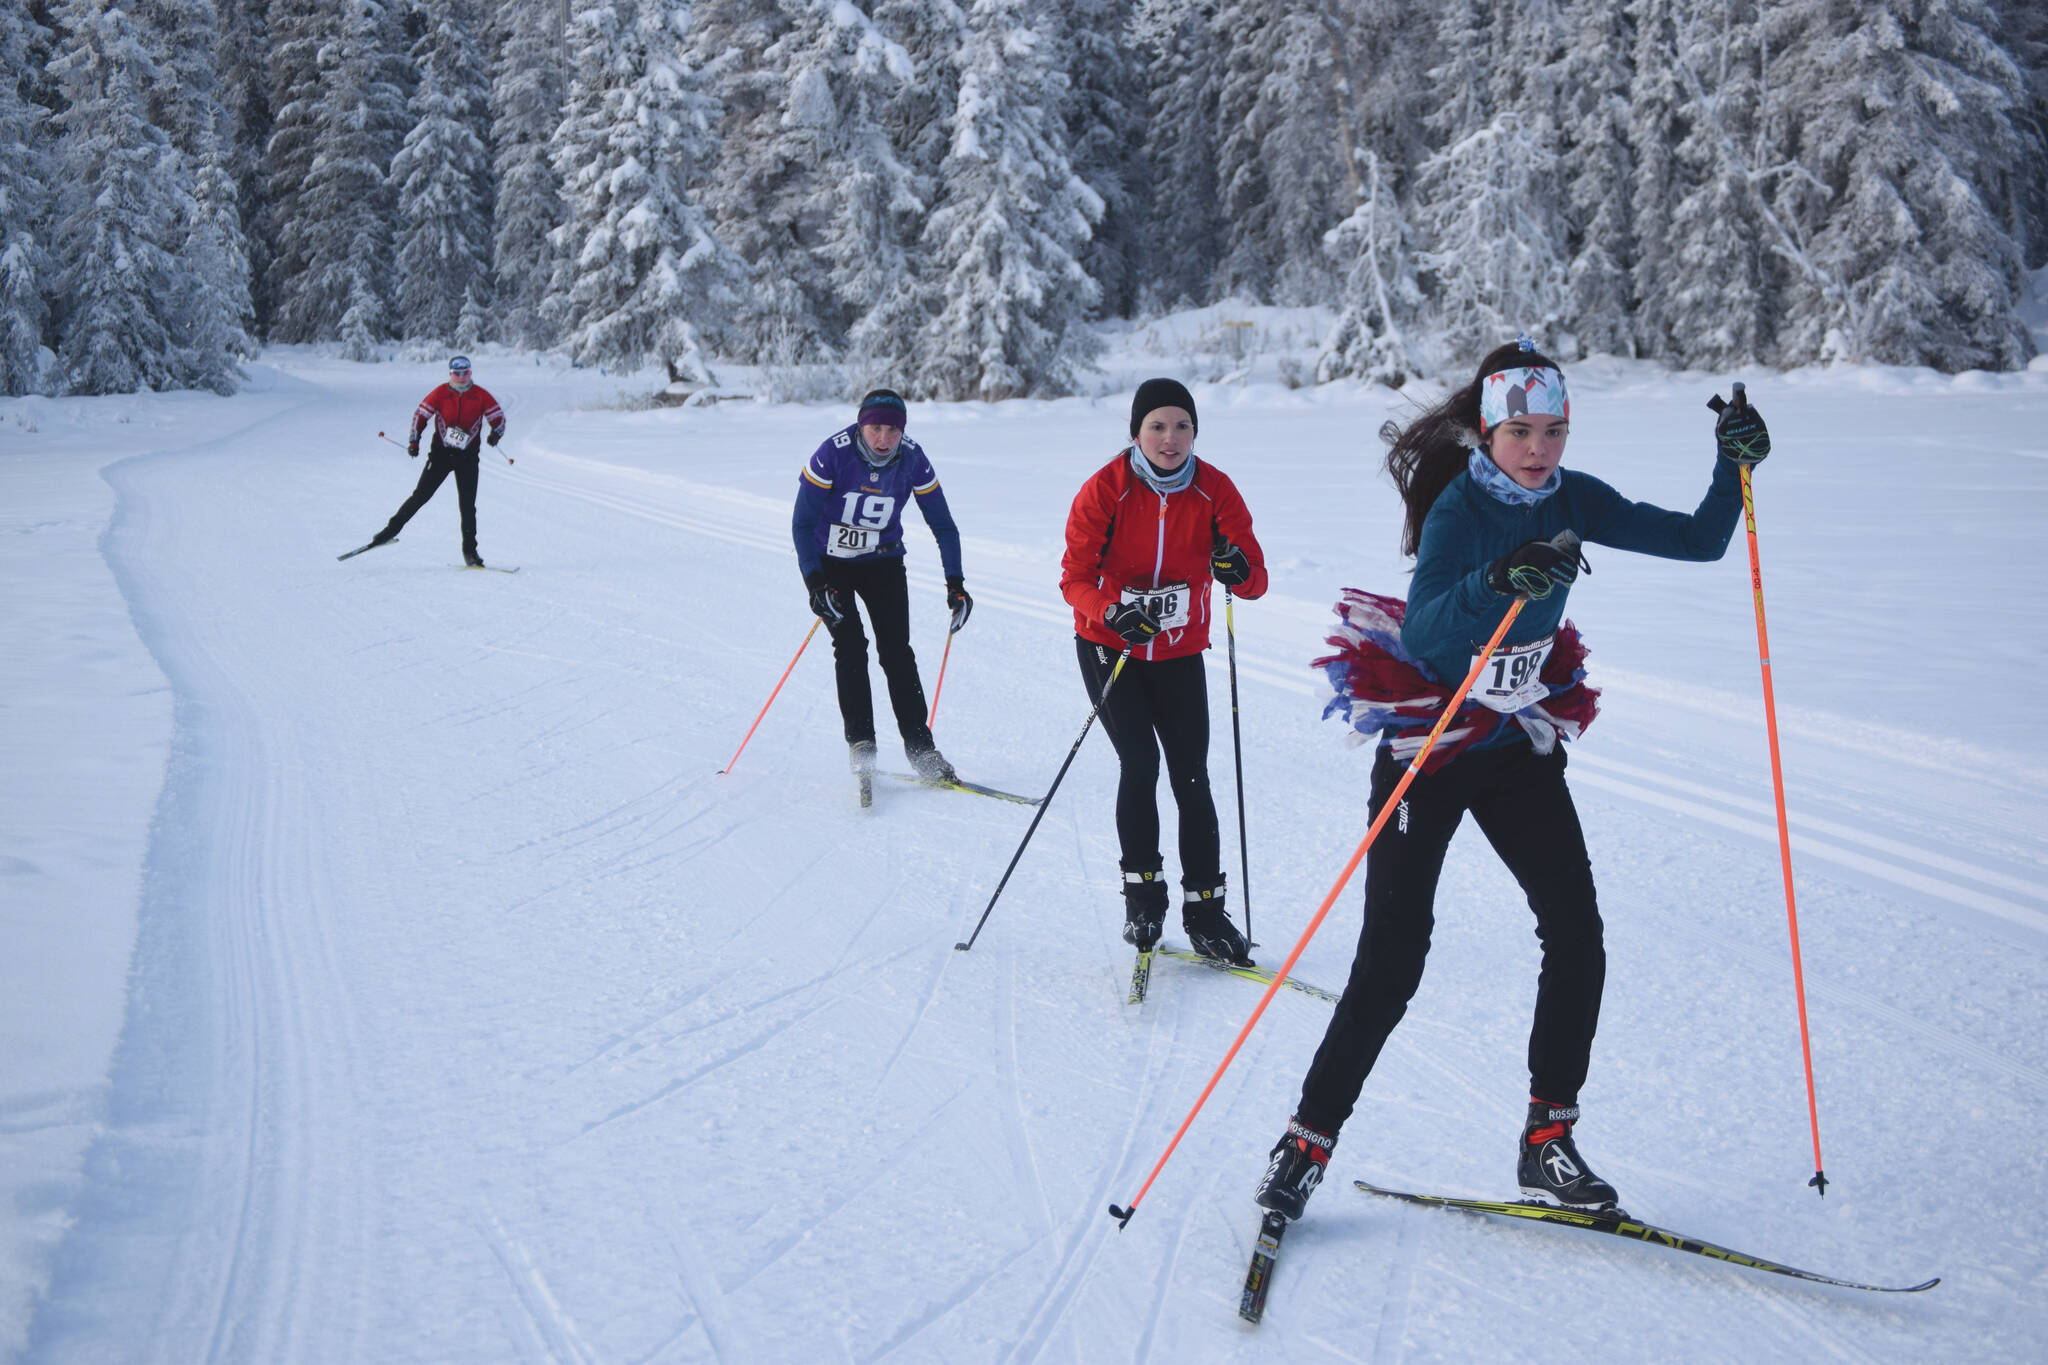 Erika Arthur leads Libby Jensen and Krista Arthur in the 17th Ski for Women on Sunday, Feb. 7, 2021, at Tsalteshi Trails just outside of Soldotna, Alaska. (Photo by Jeff Helminiak/Peninsula Clarion)
Photo by Jeff Helminiak/Peninsula Clarion
Erika Arthur leads Libby Jensen and Krista Arthur in the 17th Ski for Women on Sunday, Feb. 7 at Tsalteshi Trails just outside of Soldotna.